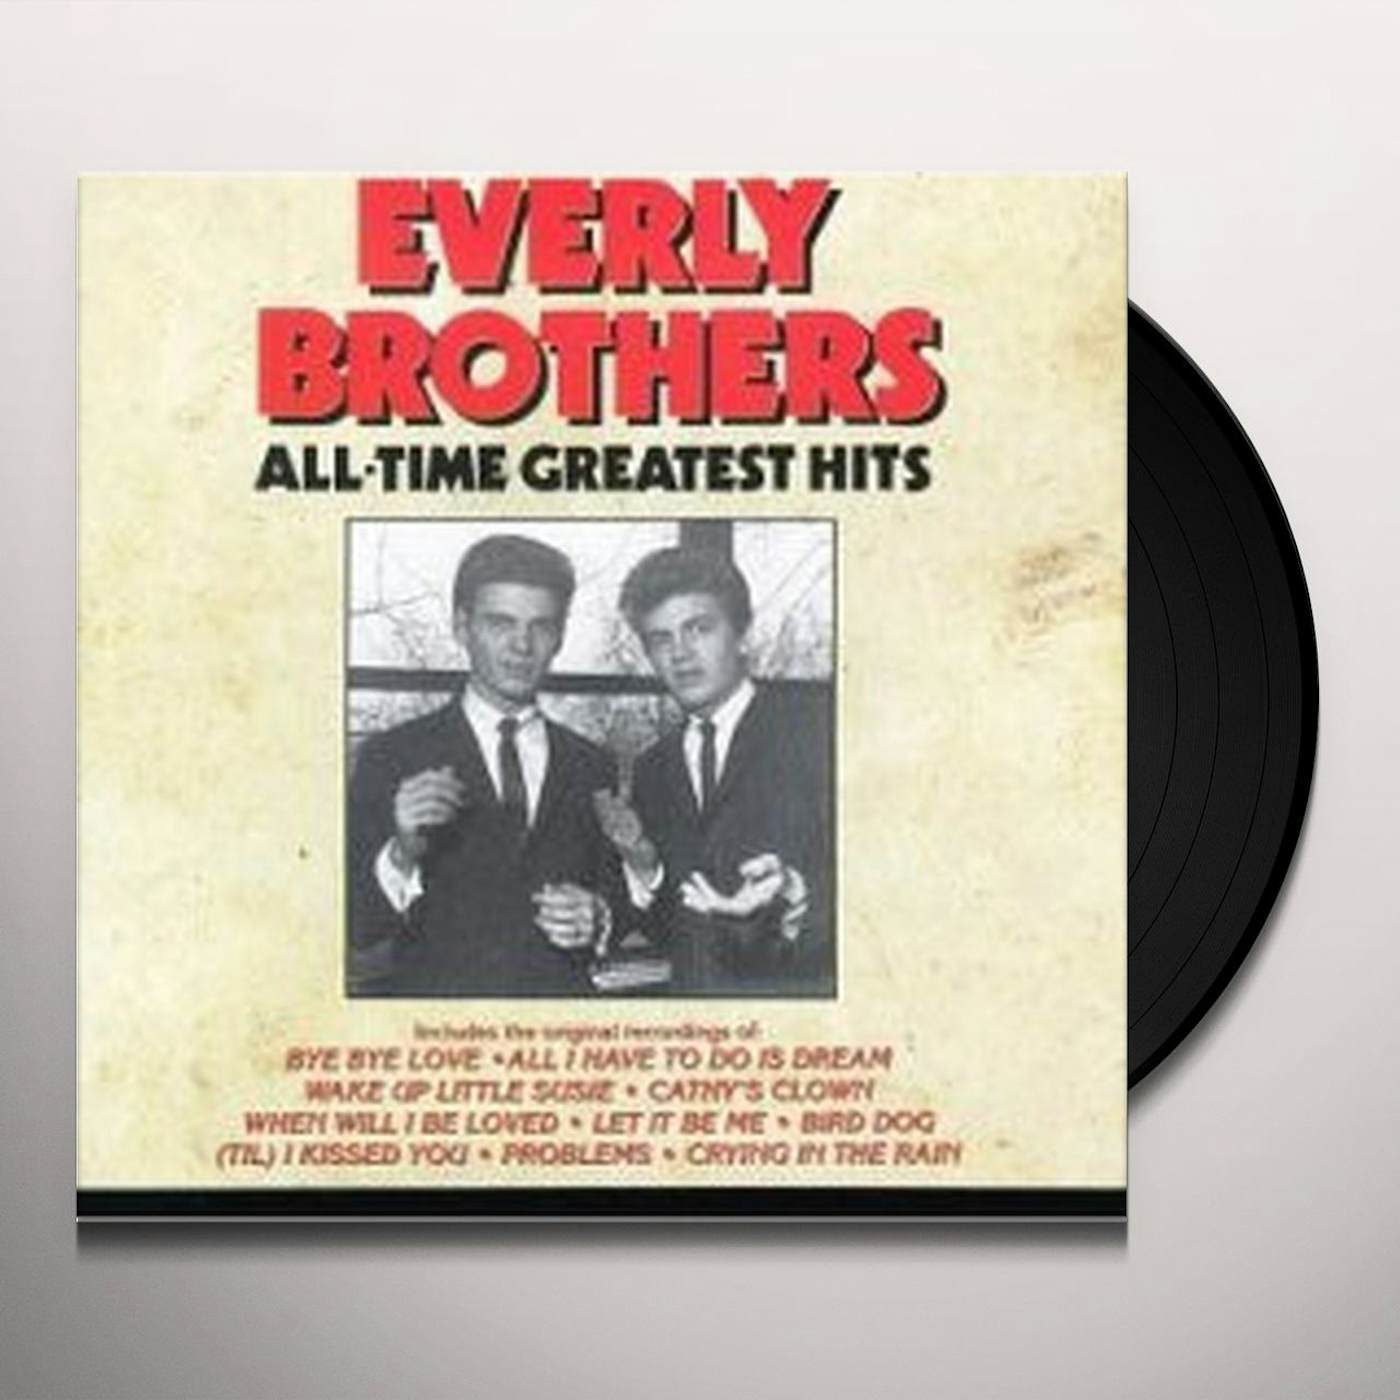 The Everly Brothers ALL-TIME GREATEST HITS Vinyl Record